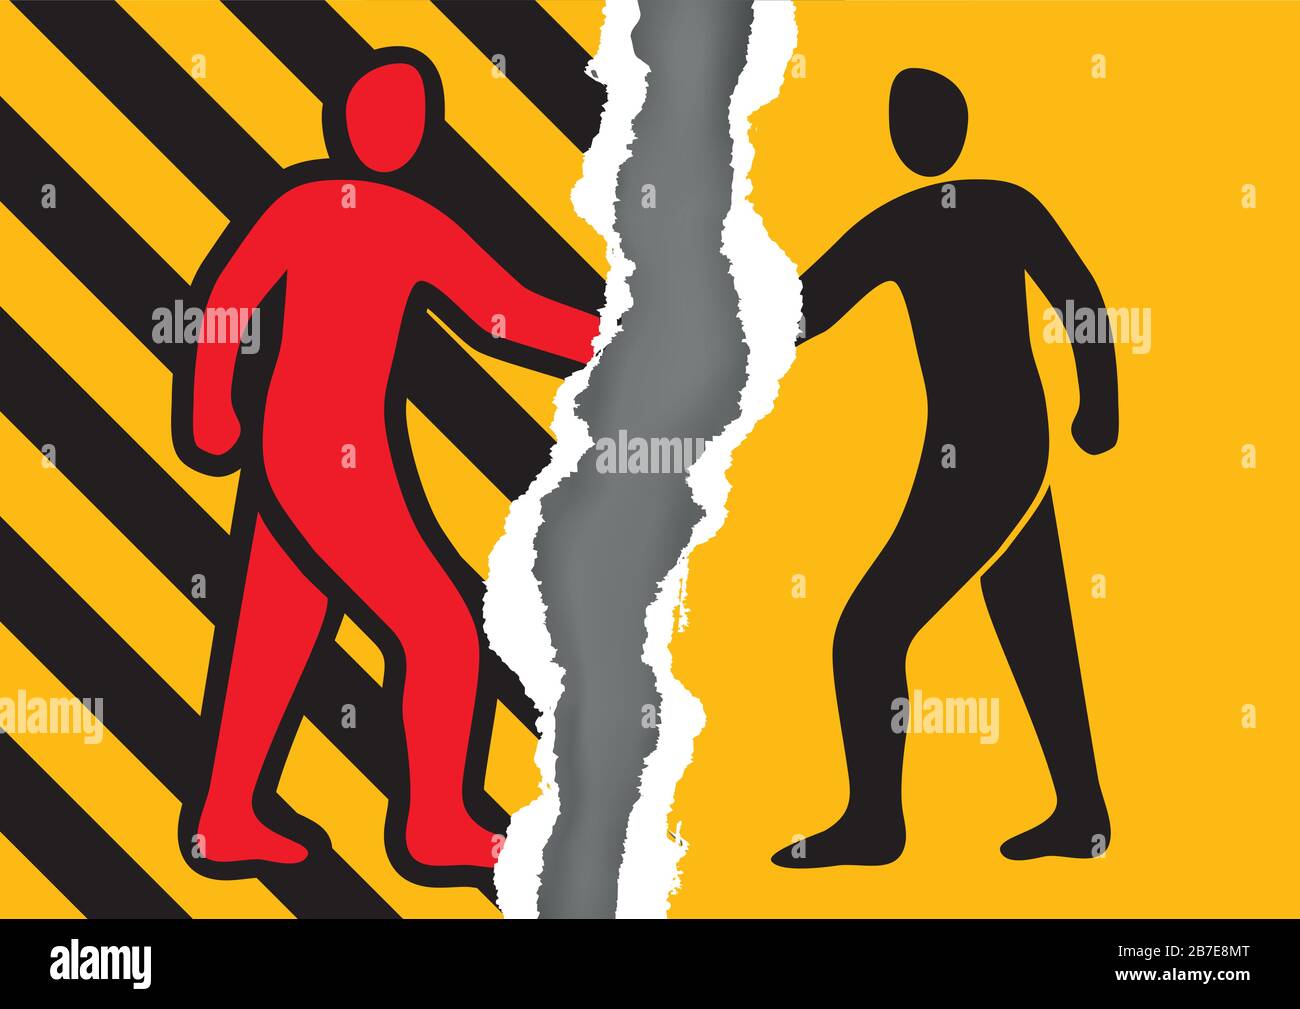 No Handshake,risk of virus transmission. Torn yellow paper with two male silhouettes hand shaking at a meeting. Risk of personal contact and touch. Stock Vector